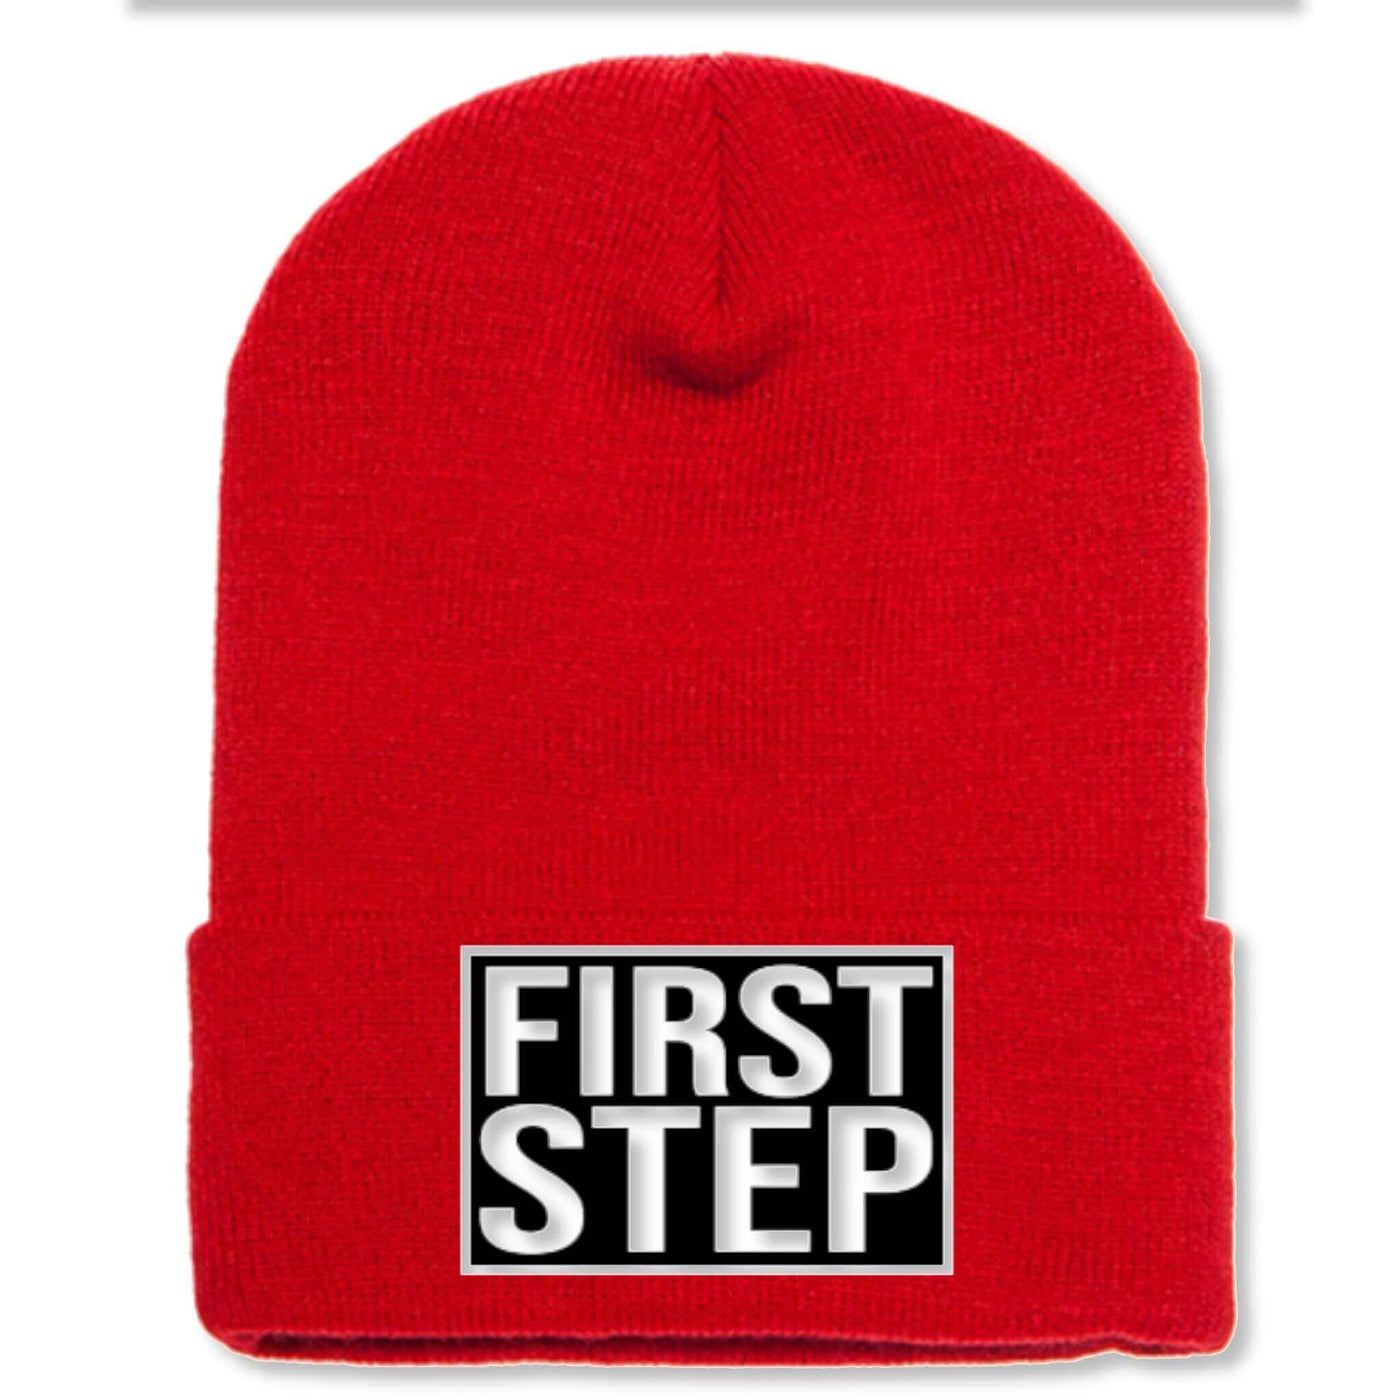 Red Beanie with a First Step Apparel Patch